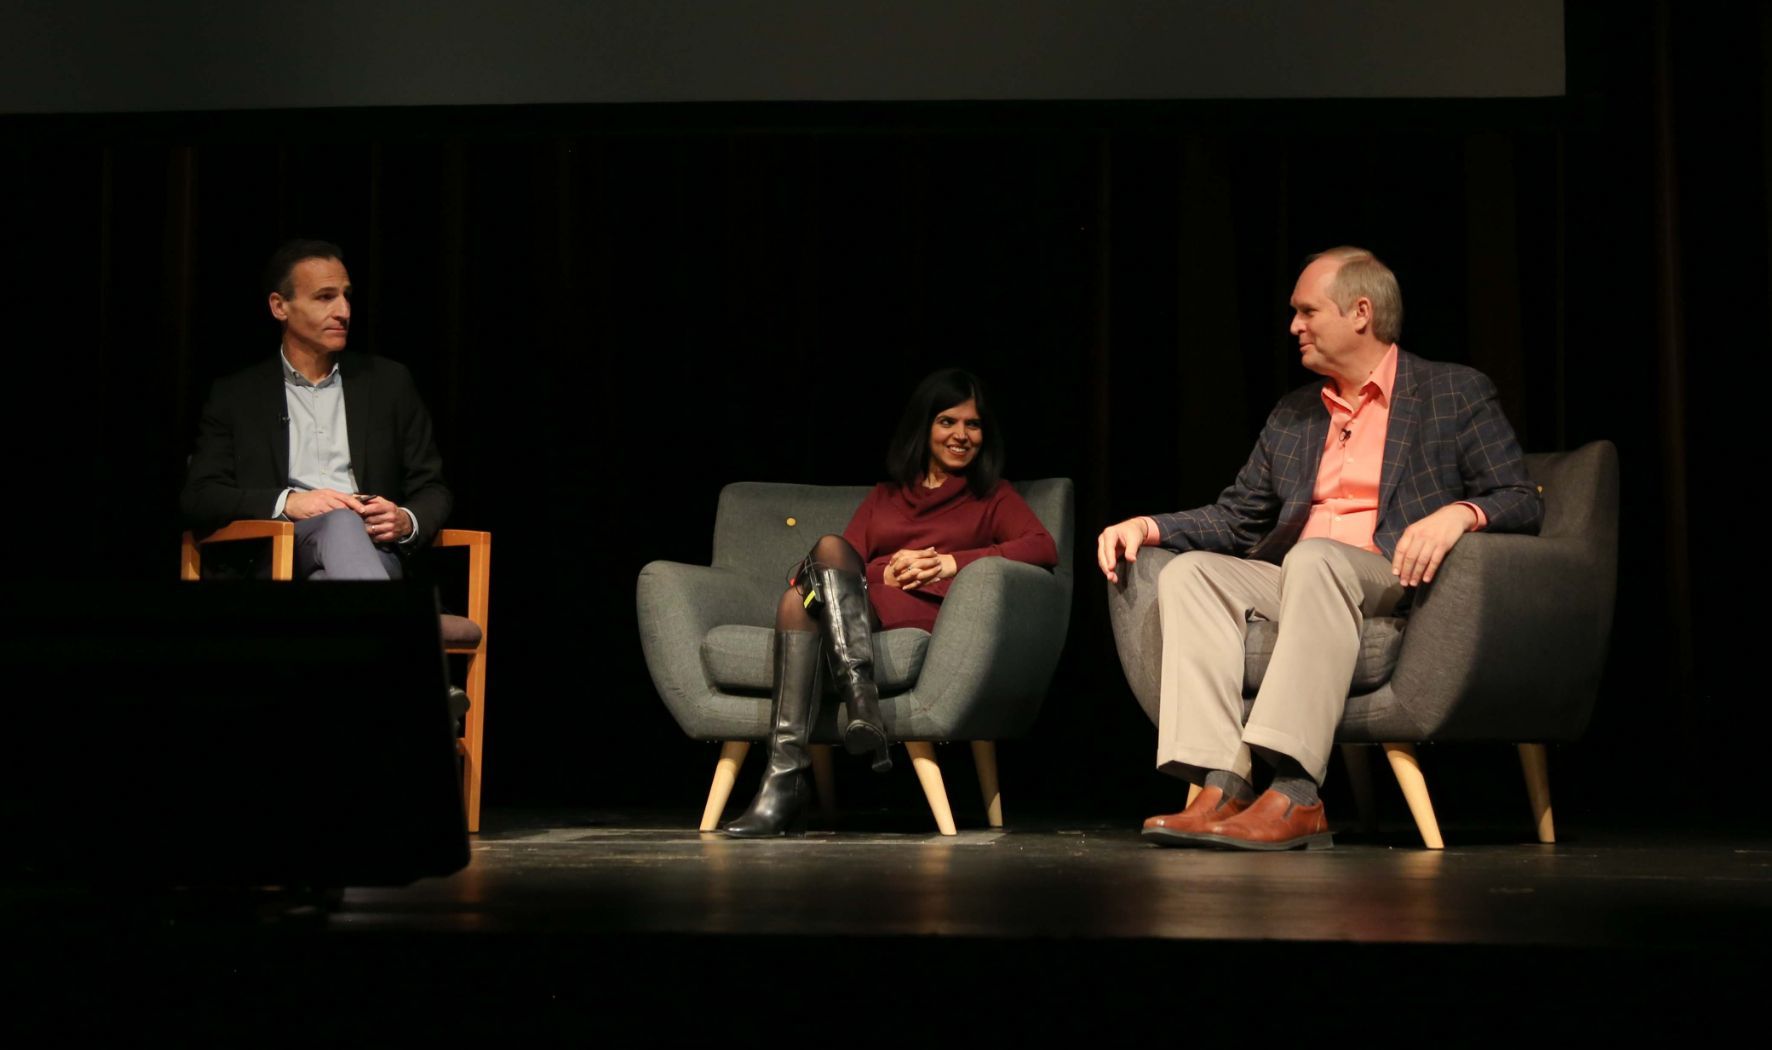 Tom Denari sits with Monica Wadhwa and Robin Hanson onstage during Q&A